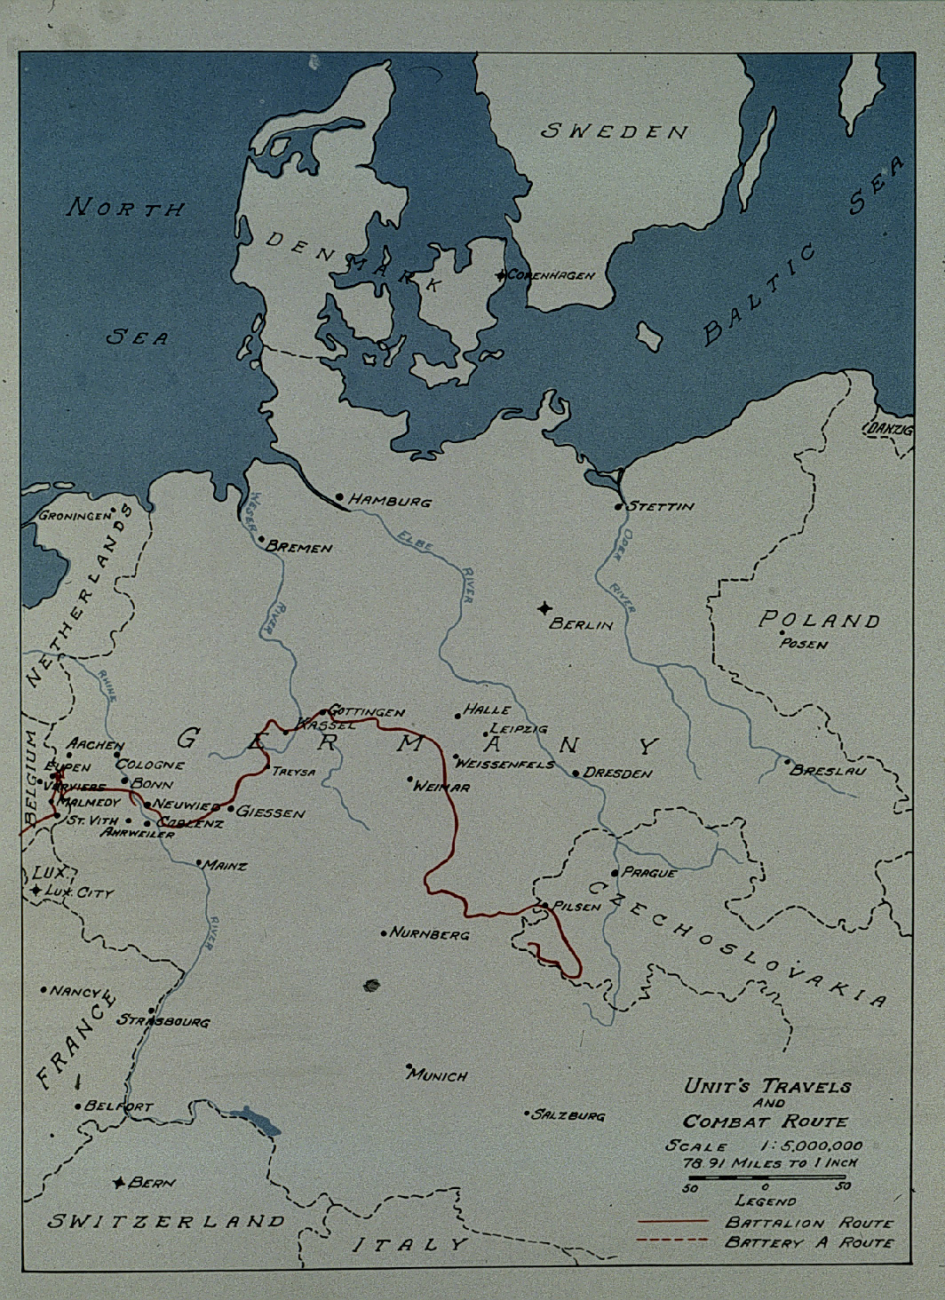 Route of 17th Field Artillery Observation Battalion through Belgium and Germany